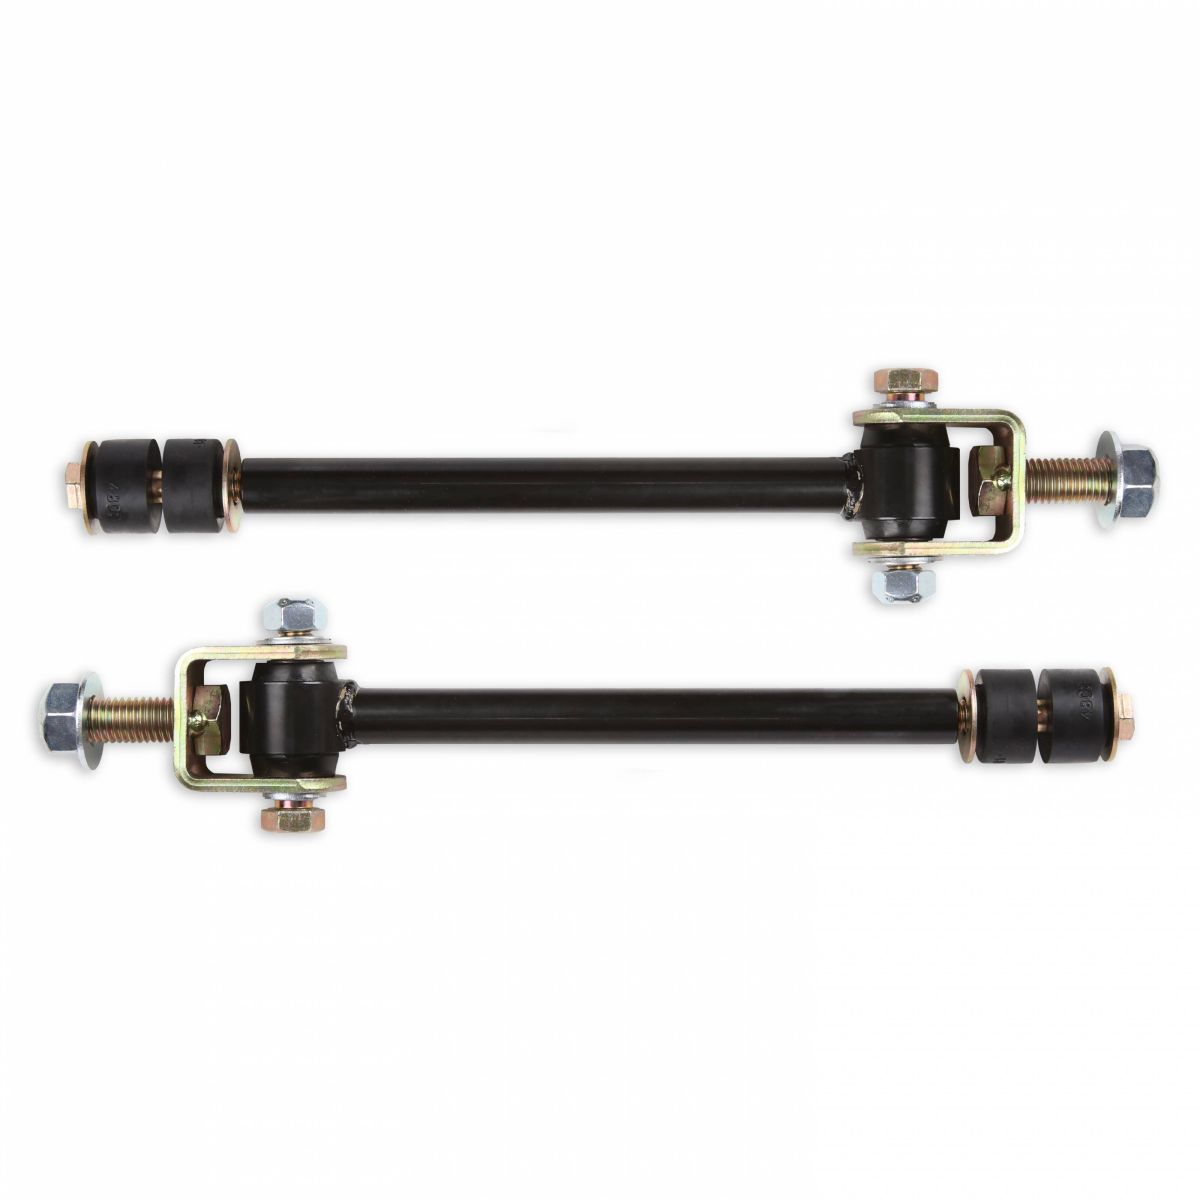 Cognito Motorsports - Cognito Front Sway Bar End Link Kit for 6-Inch Lifts on 01-19 2500/3500 2WD/4WD